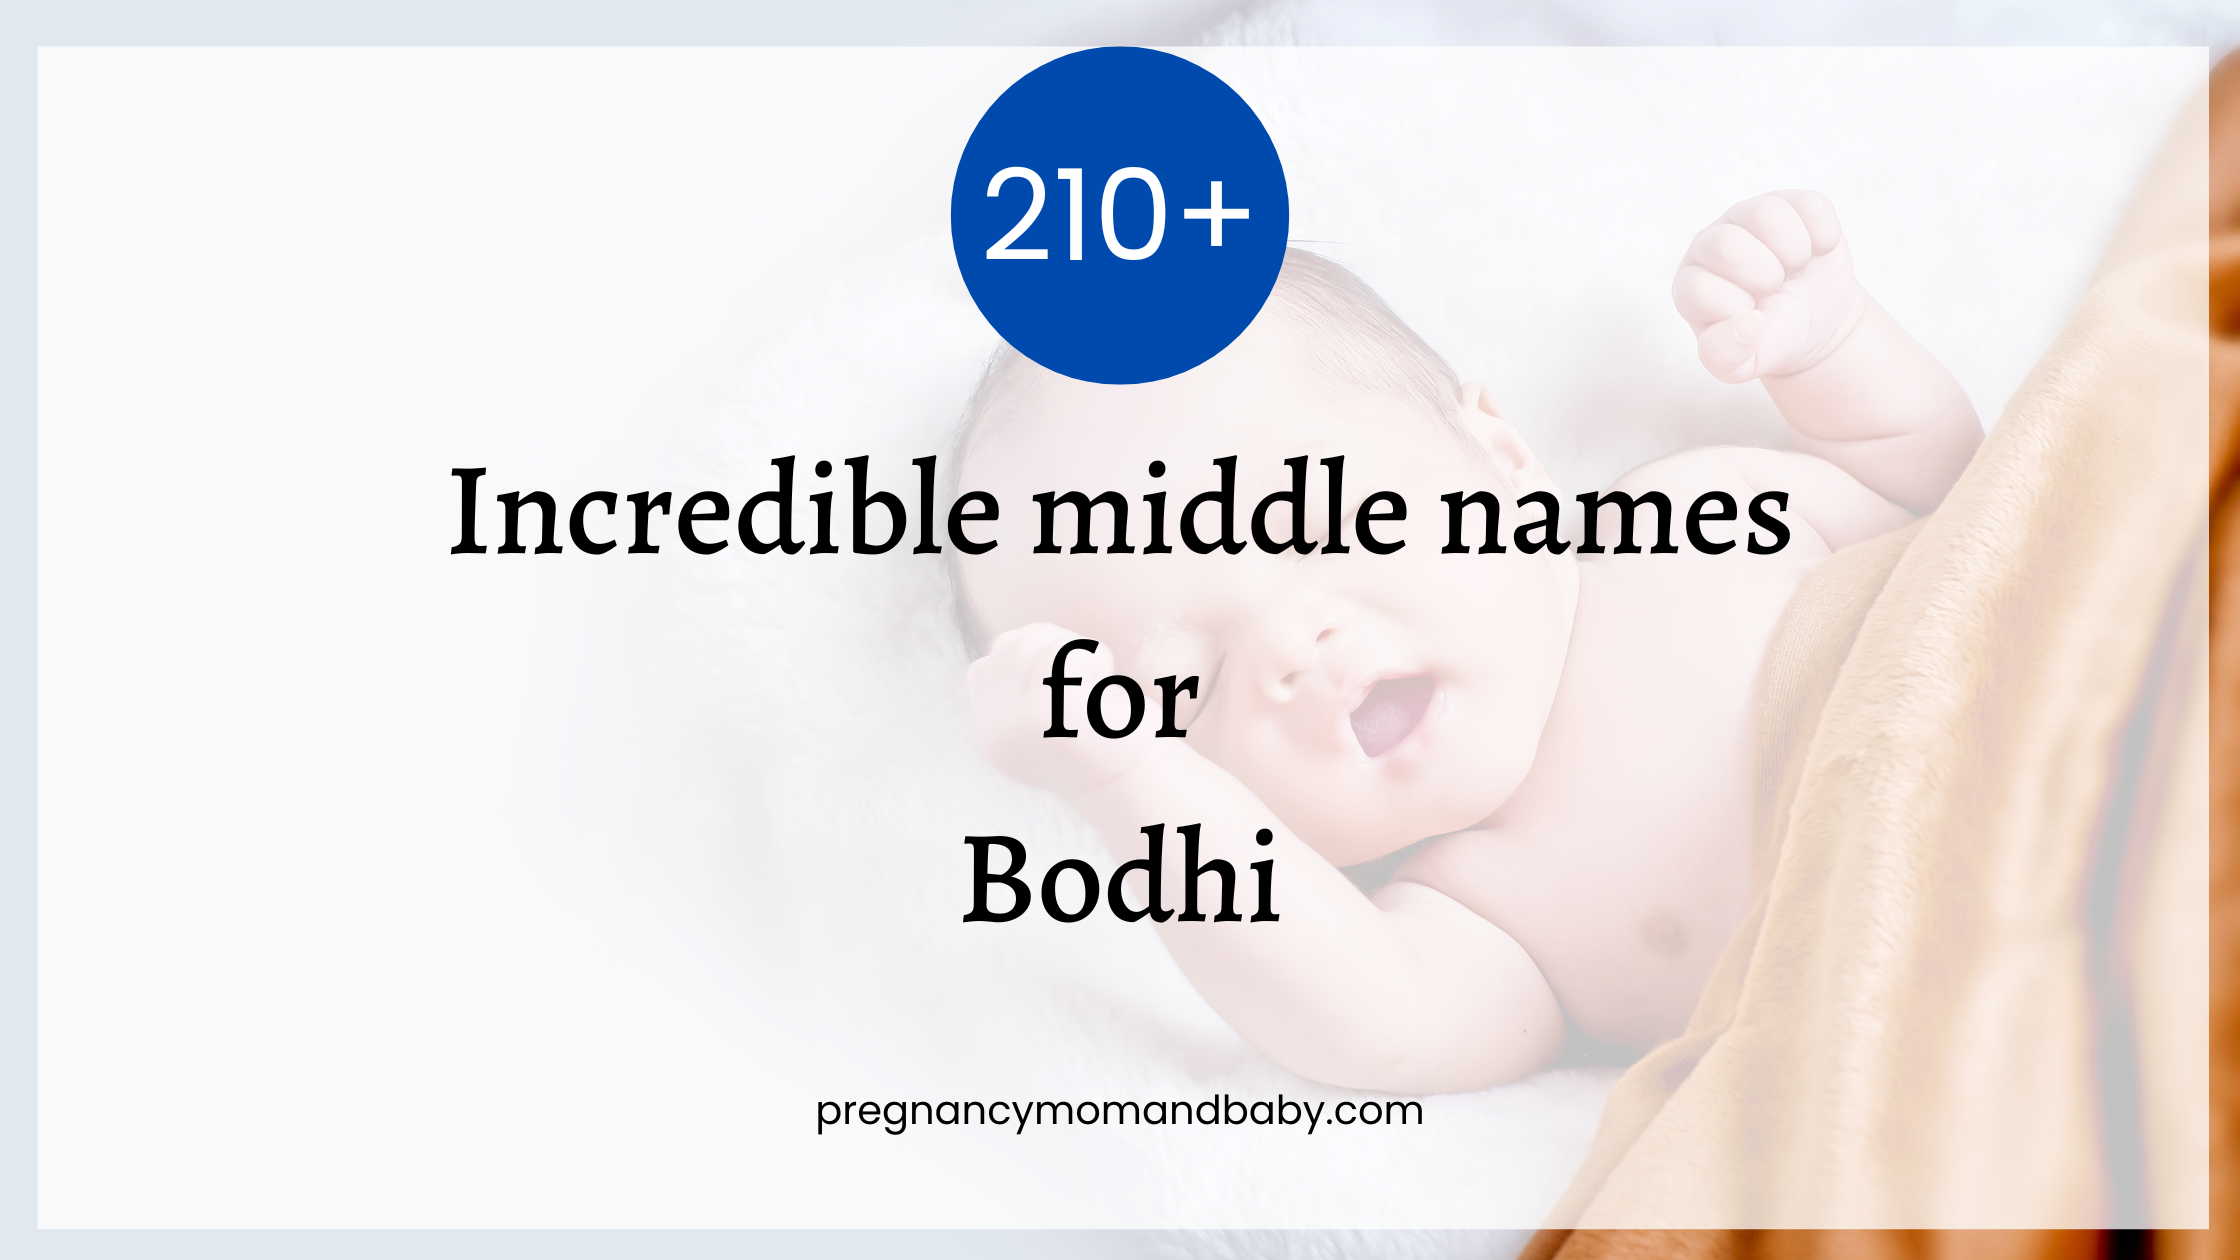 middle names for Bodhi